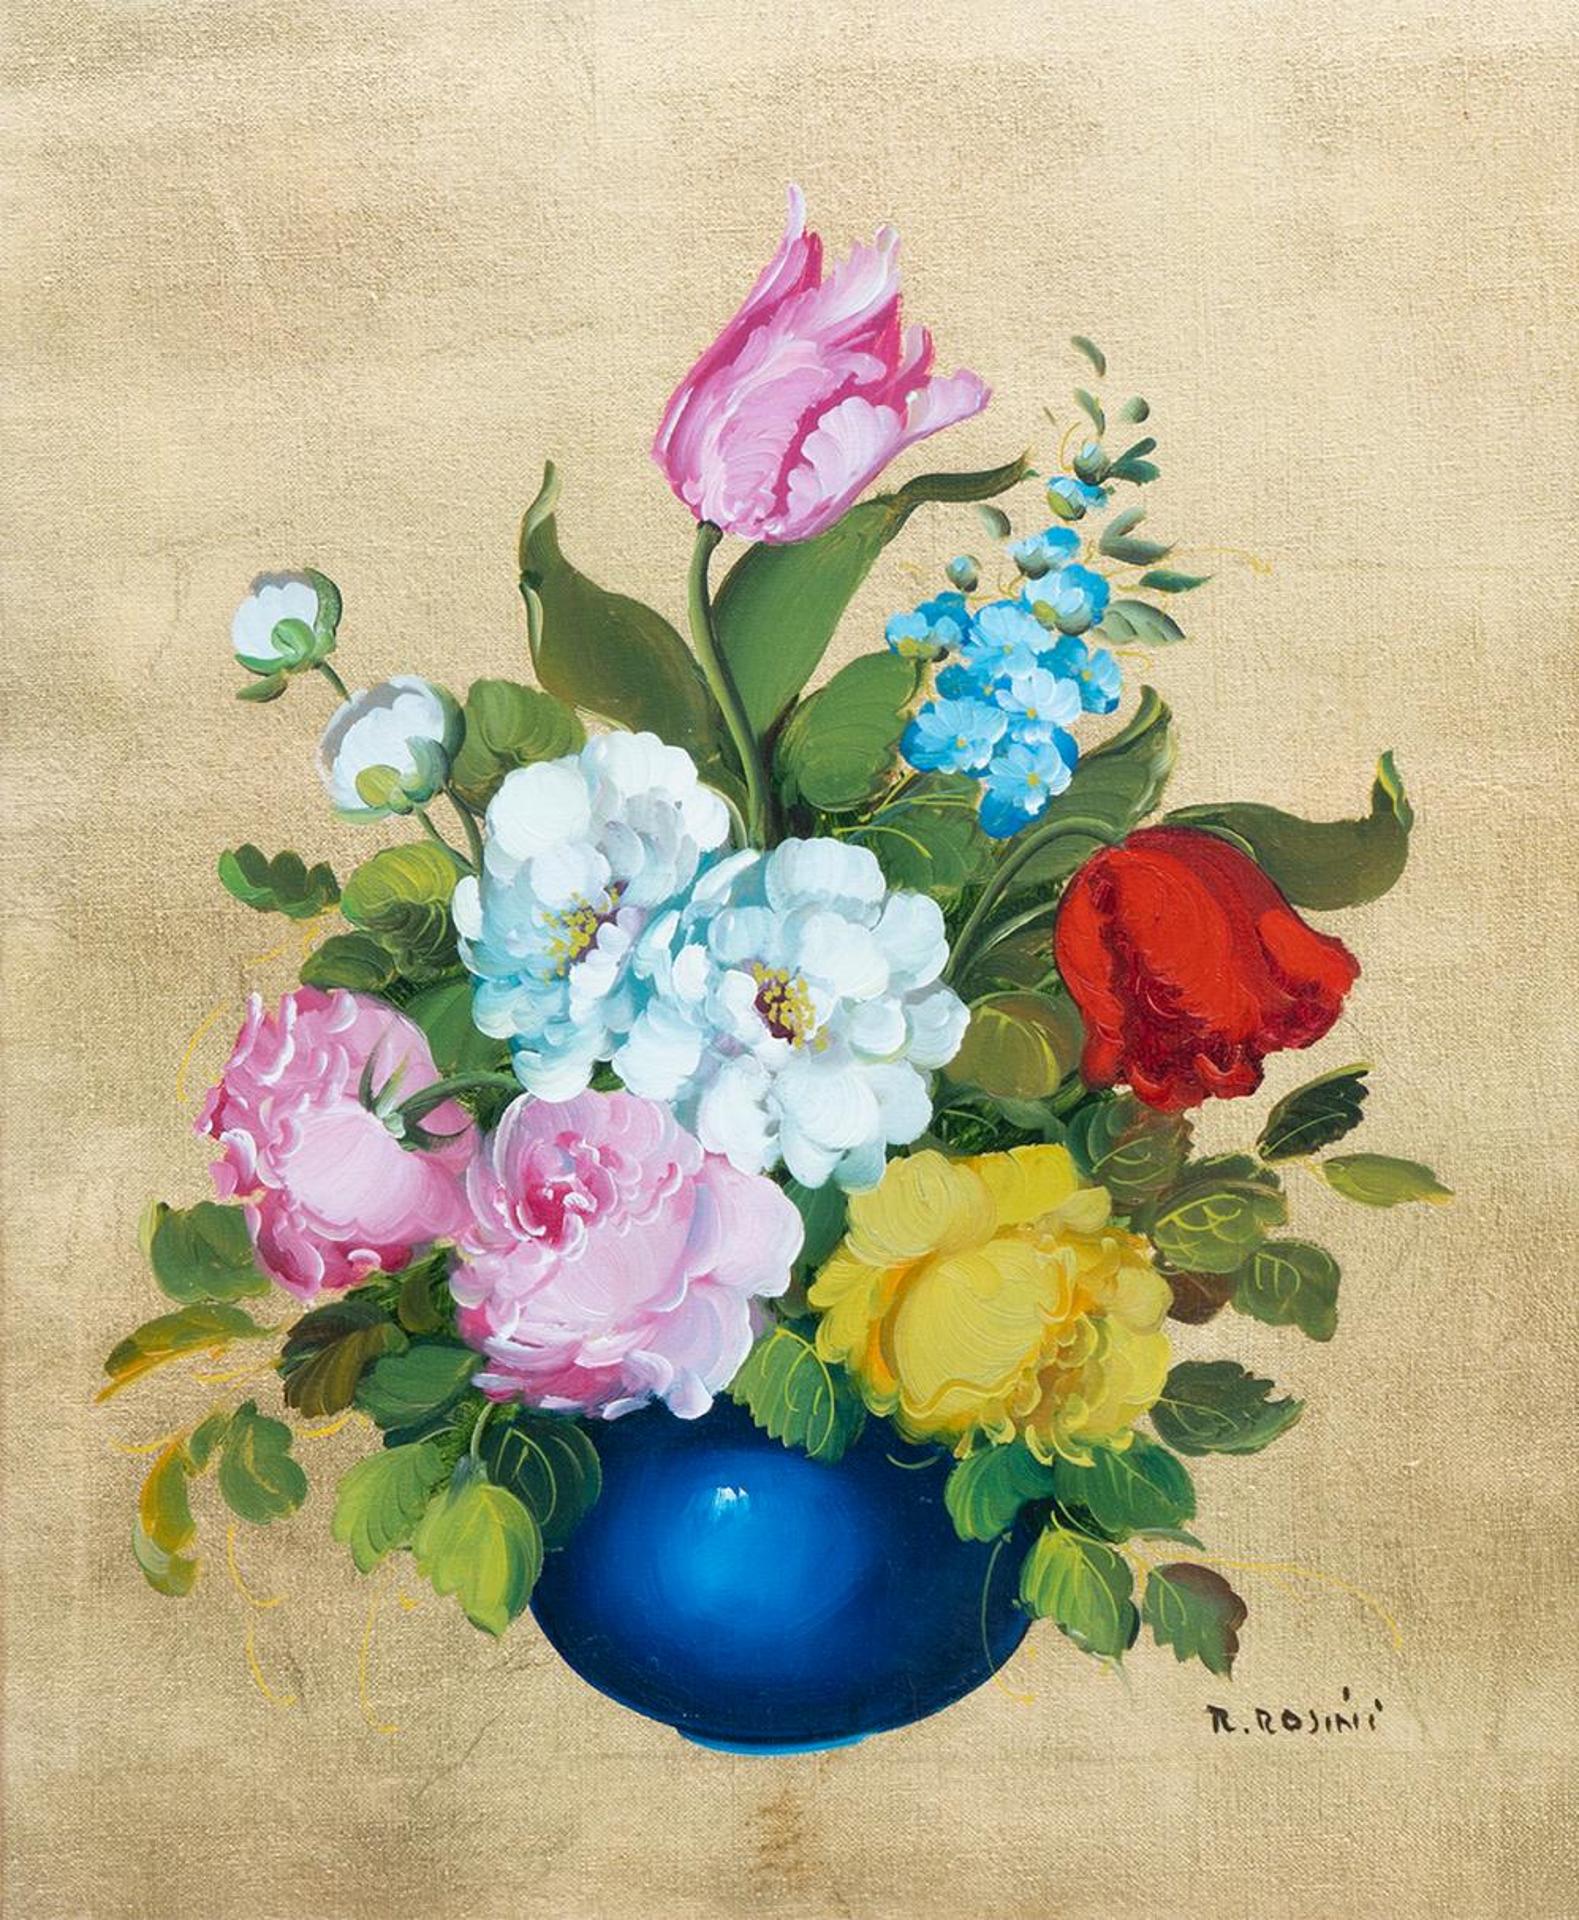 R. Rosini (1924) - Untitled - Flowers in a Blue Vase